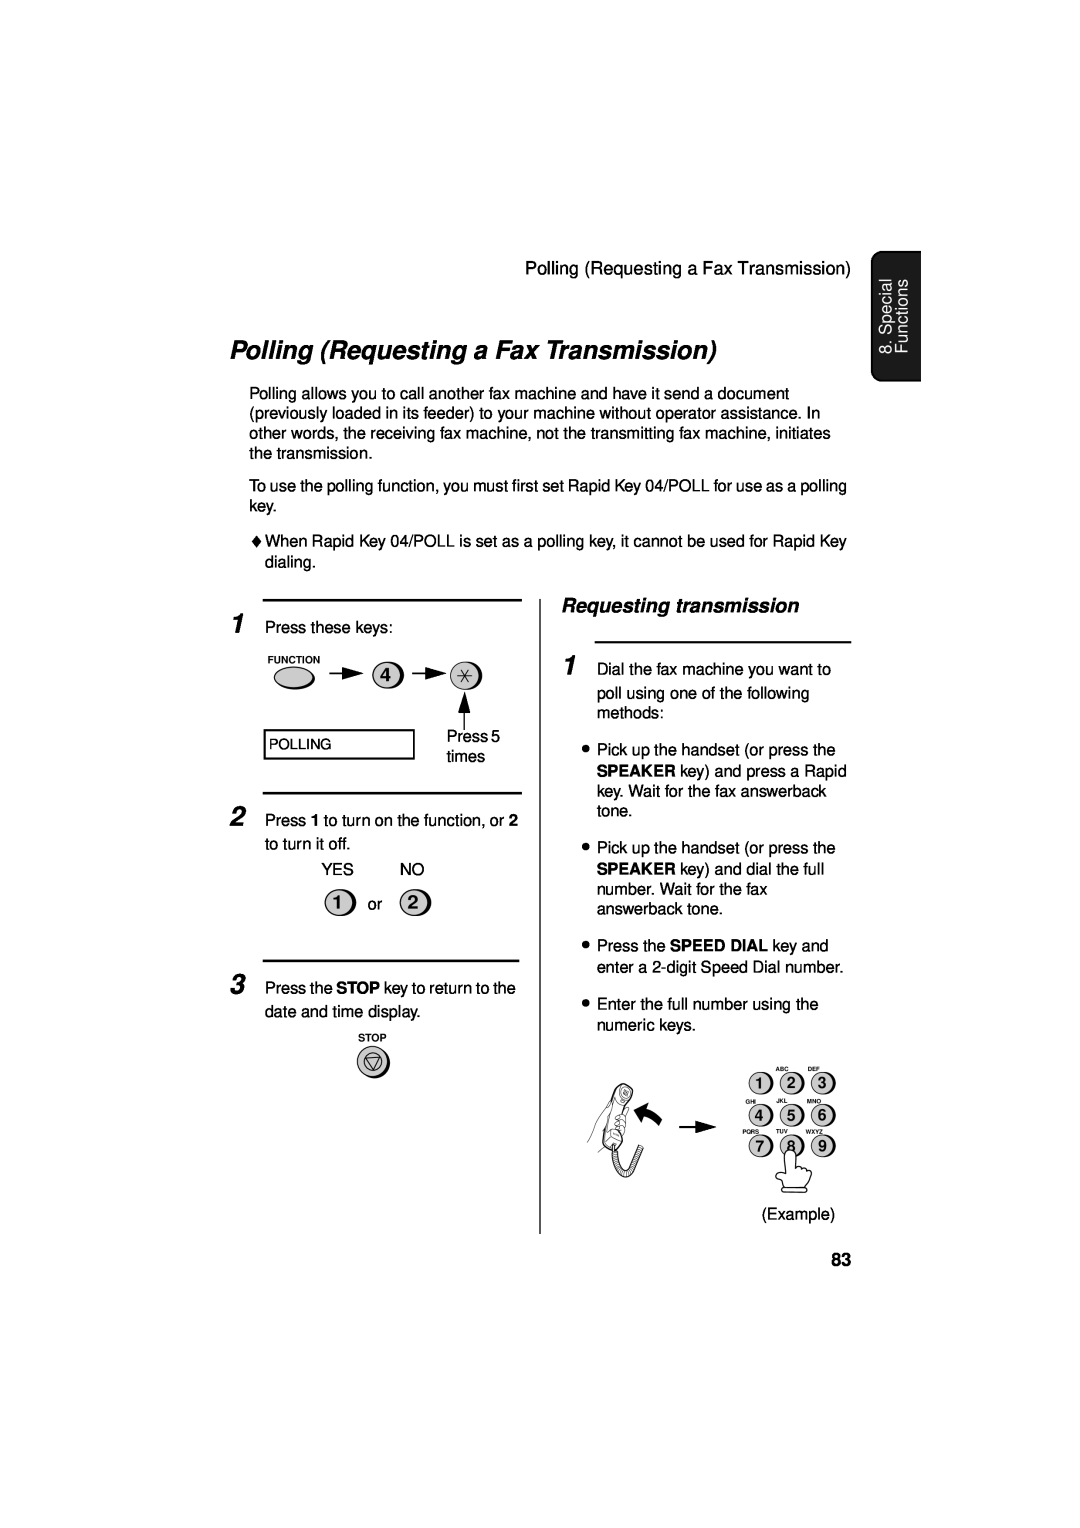 Sharp UX-340LM manual Polling Requesting a Fax Transmission, Requesting transmission, 1 or, Special Functions 